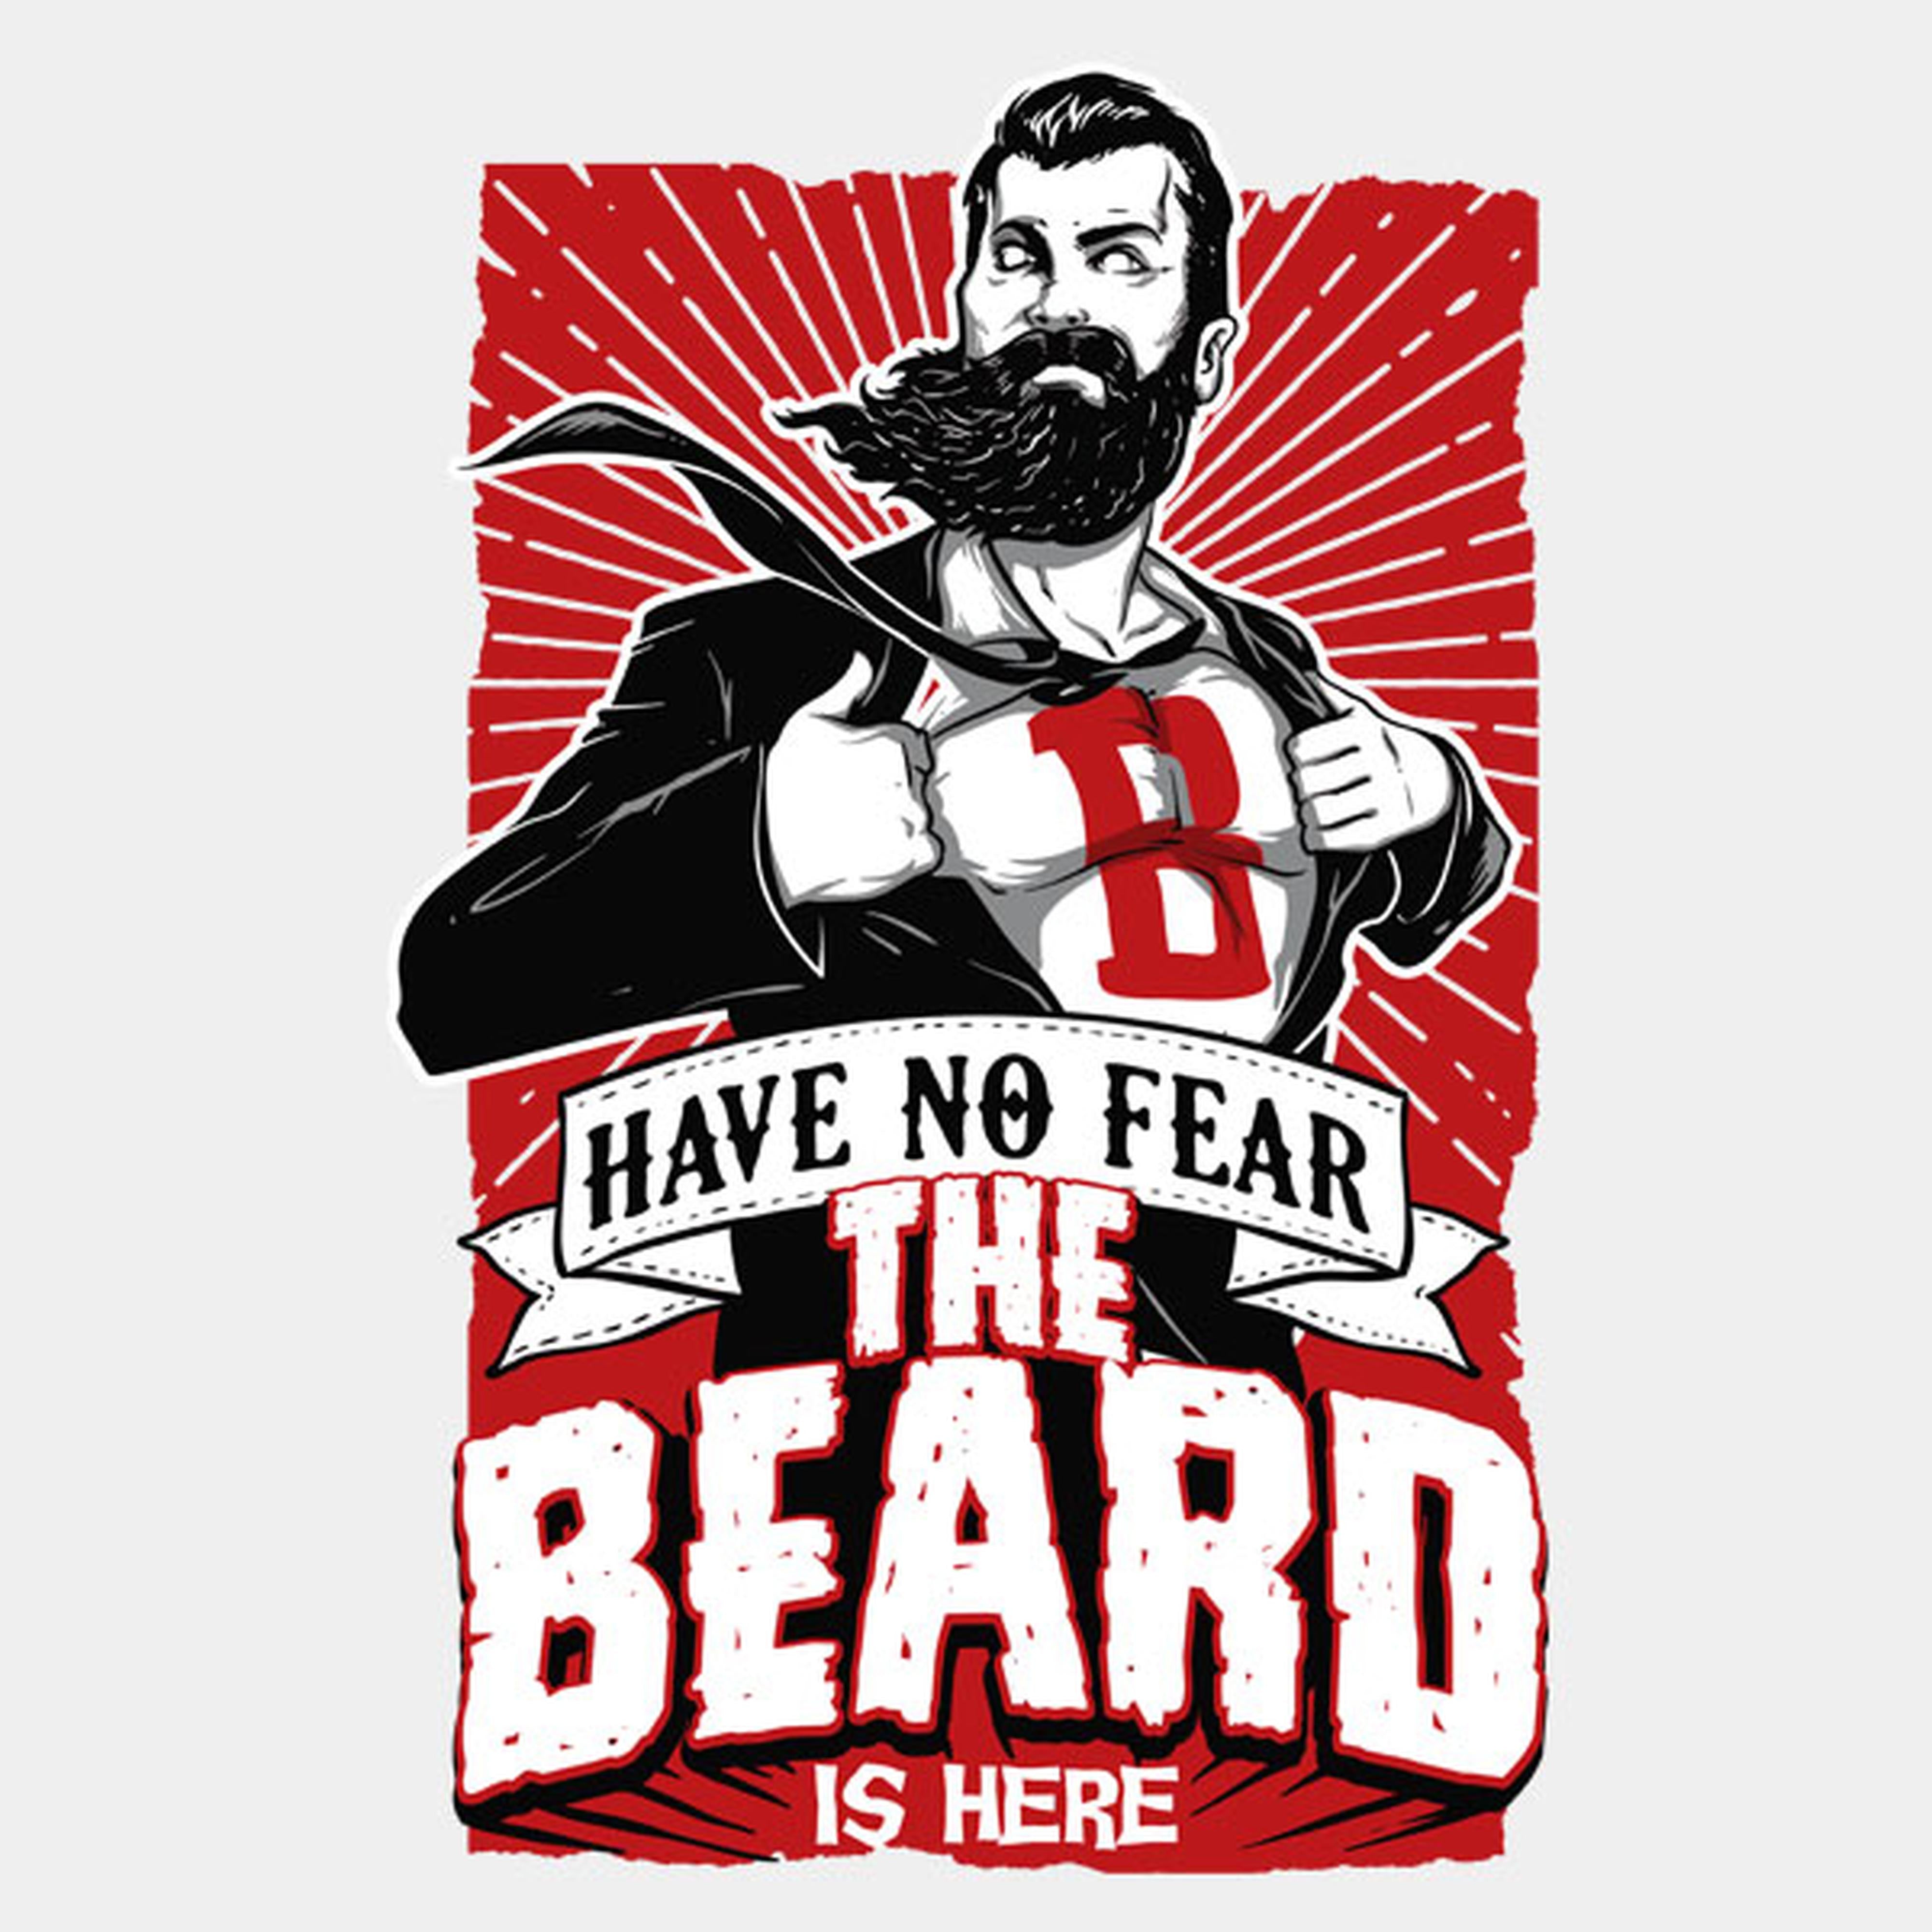 Have no fear - beard is here - T-shirt